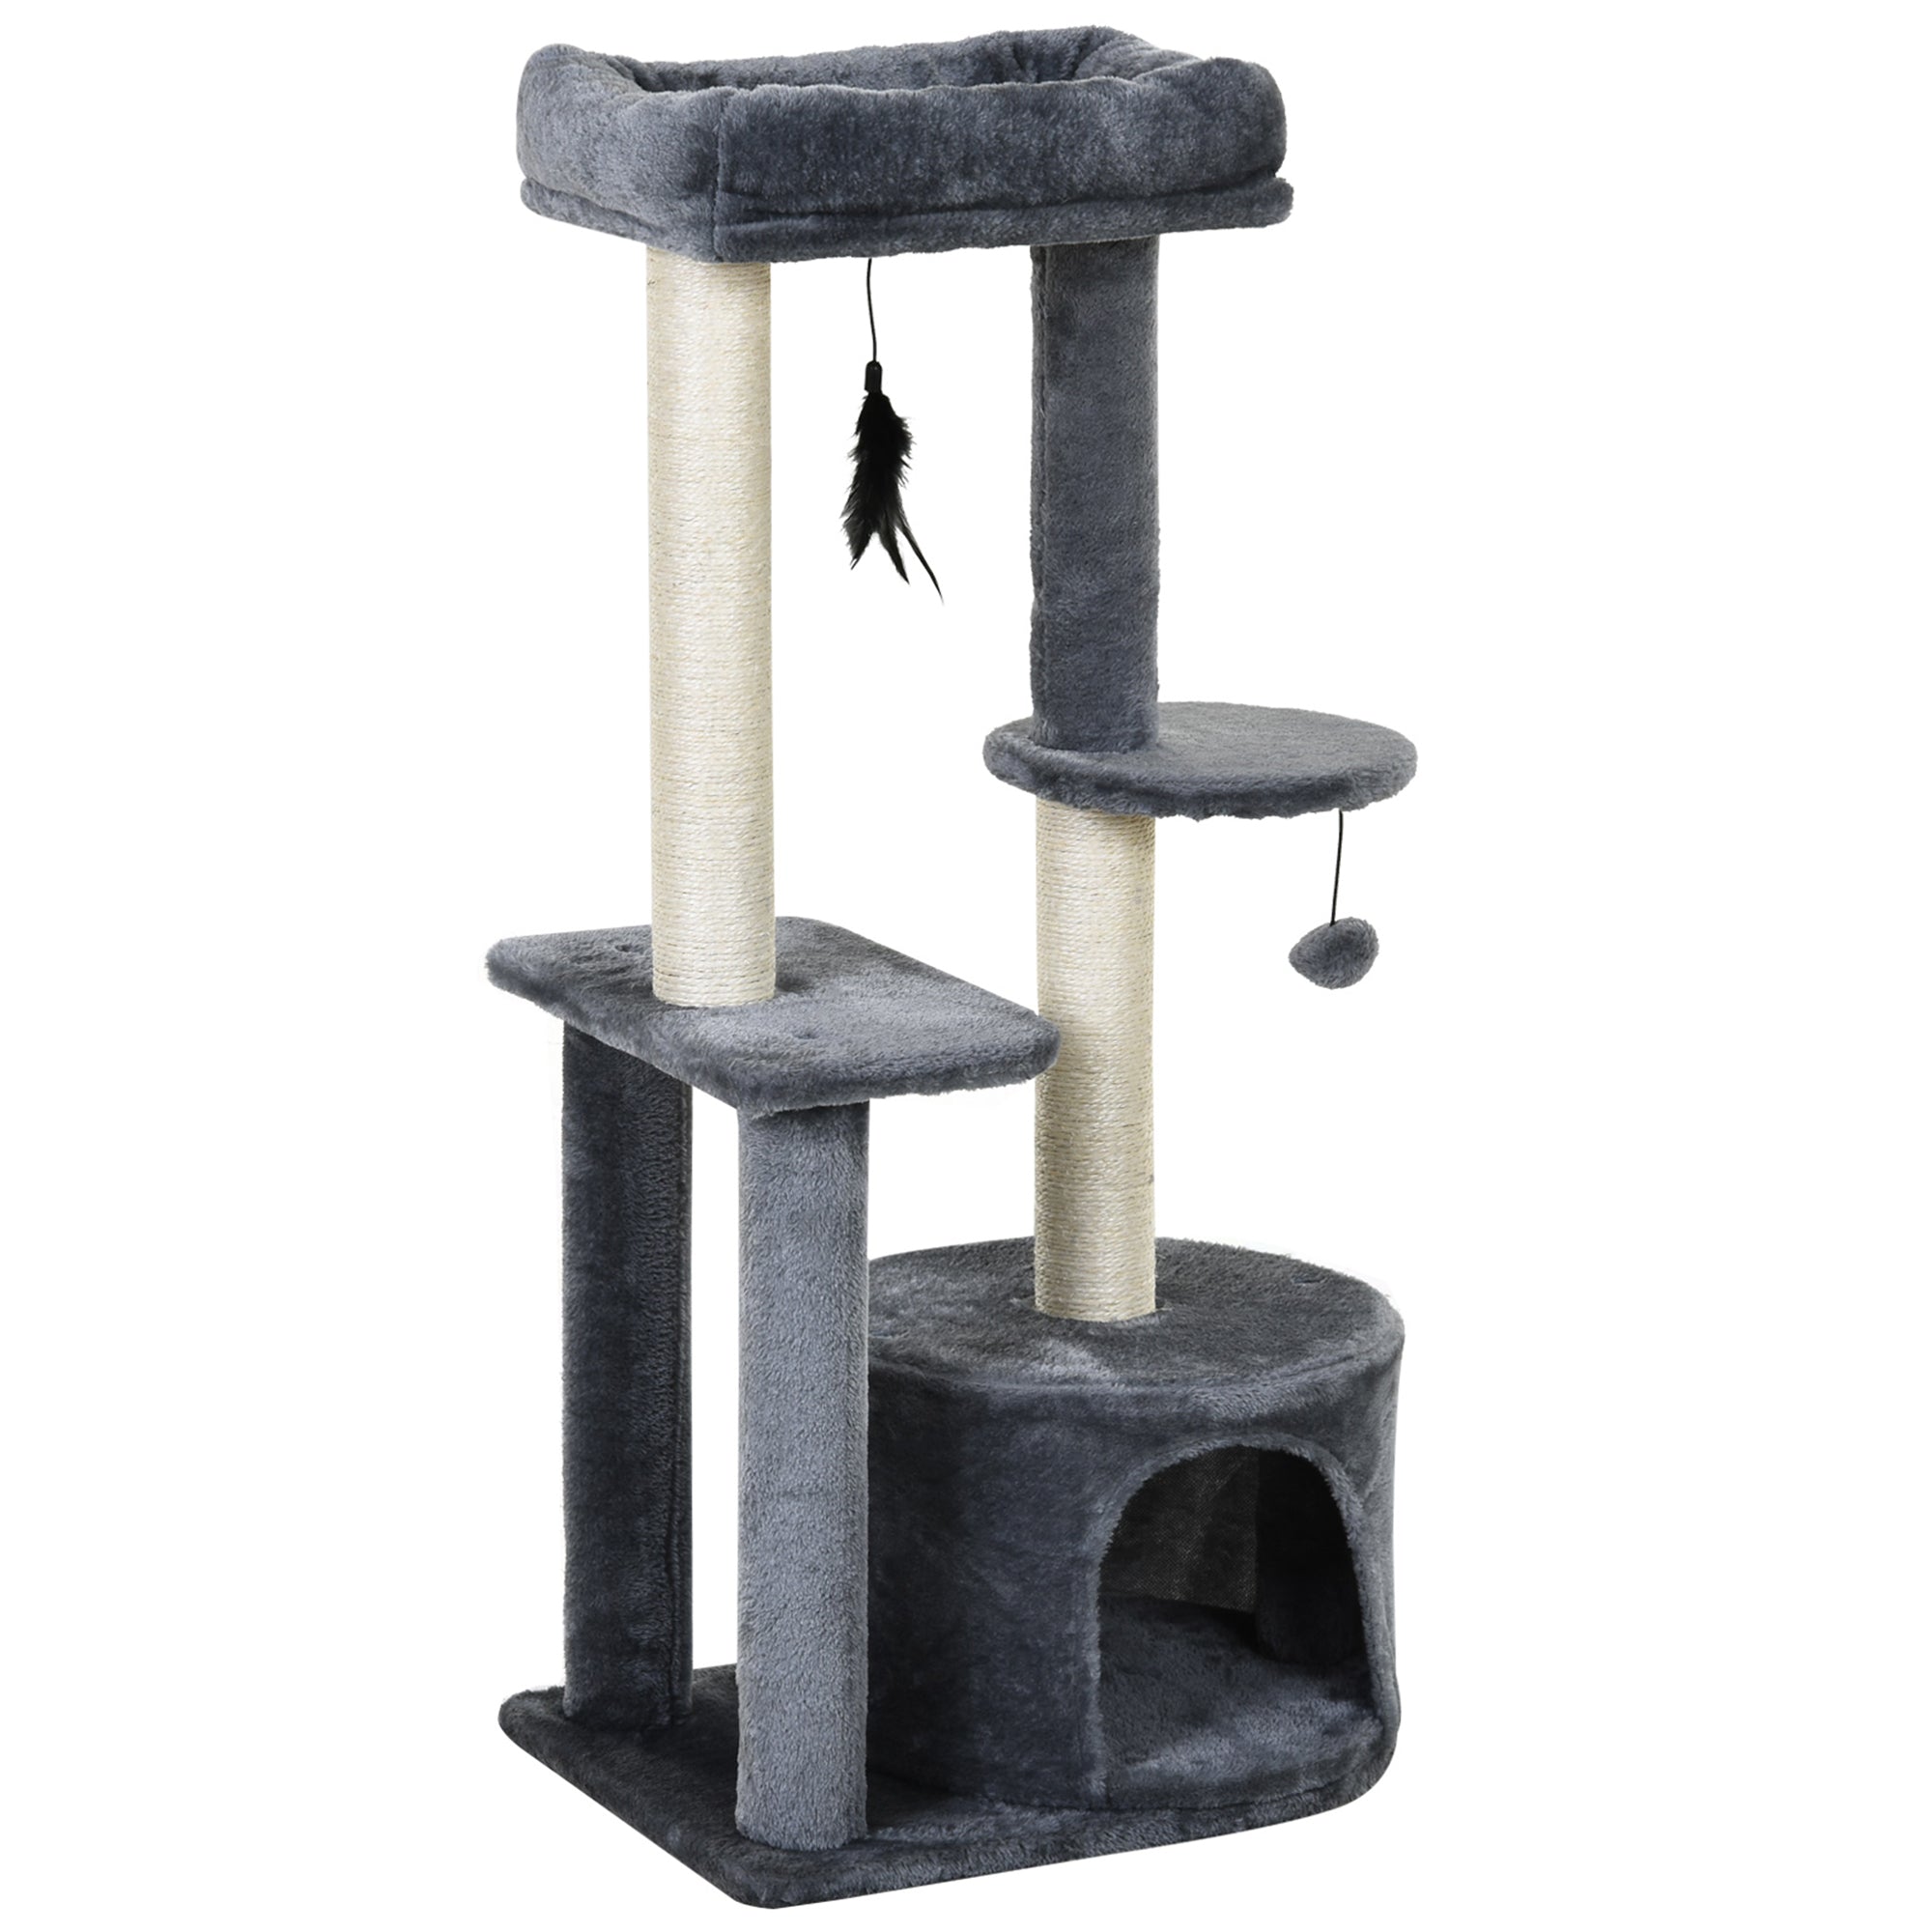 100cm Cat Tree for Indoor Cats, Multi-Activity Cat Tower with Perch House Scratching Post Platform Play Ball Rest Relax, Grey and White-0